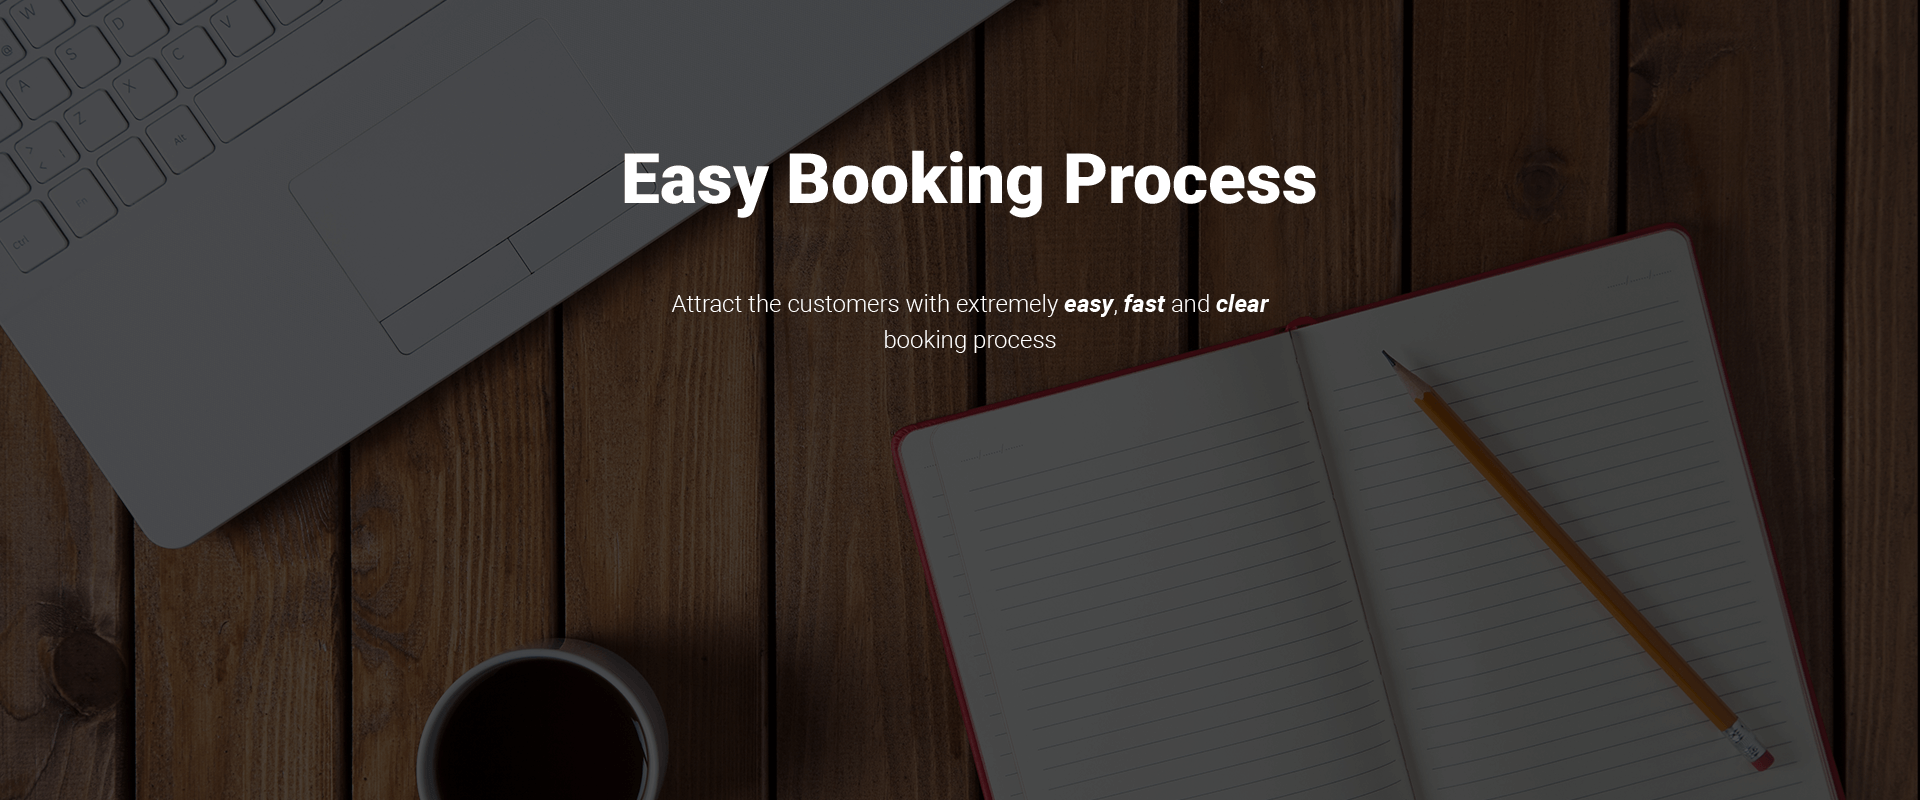 Easy Booking Prosess